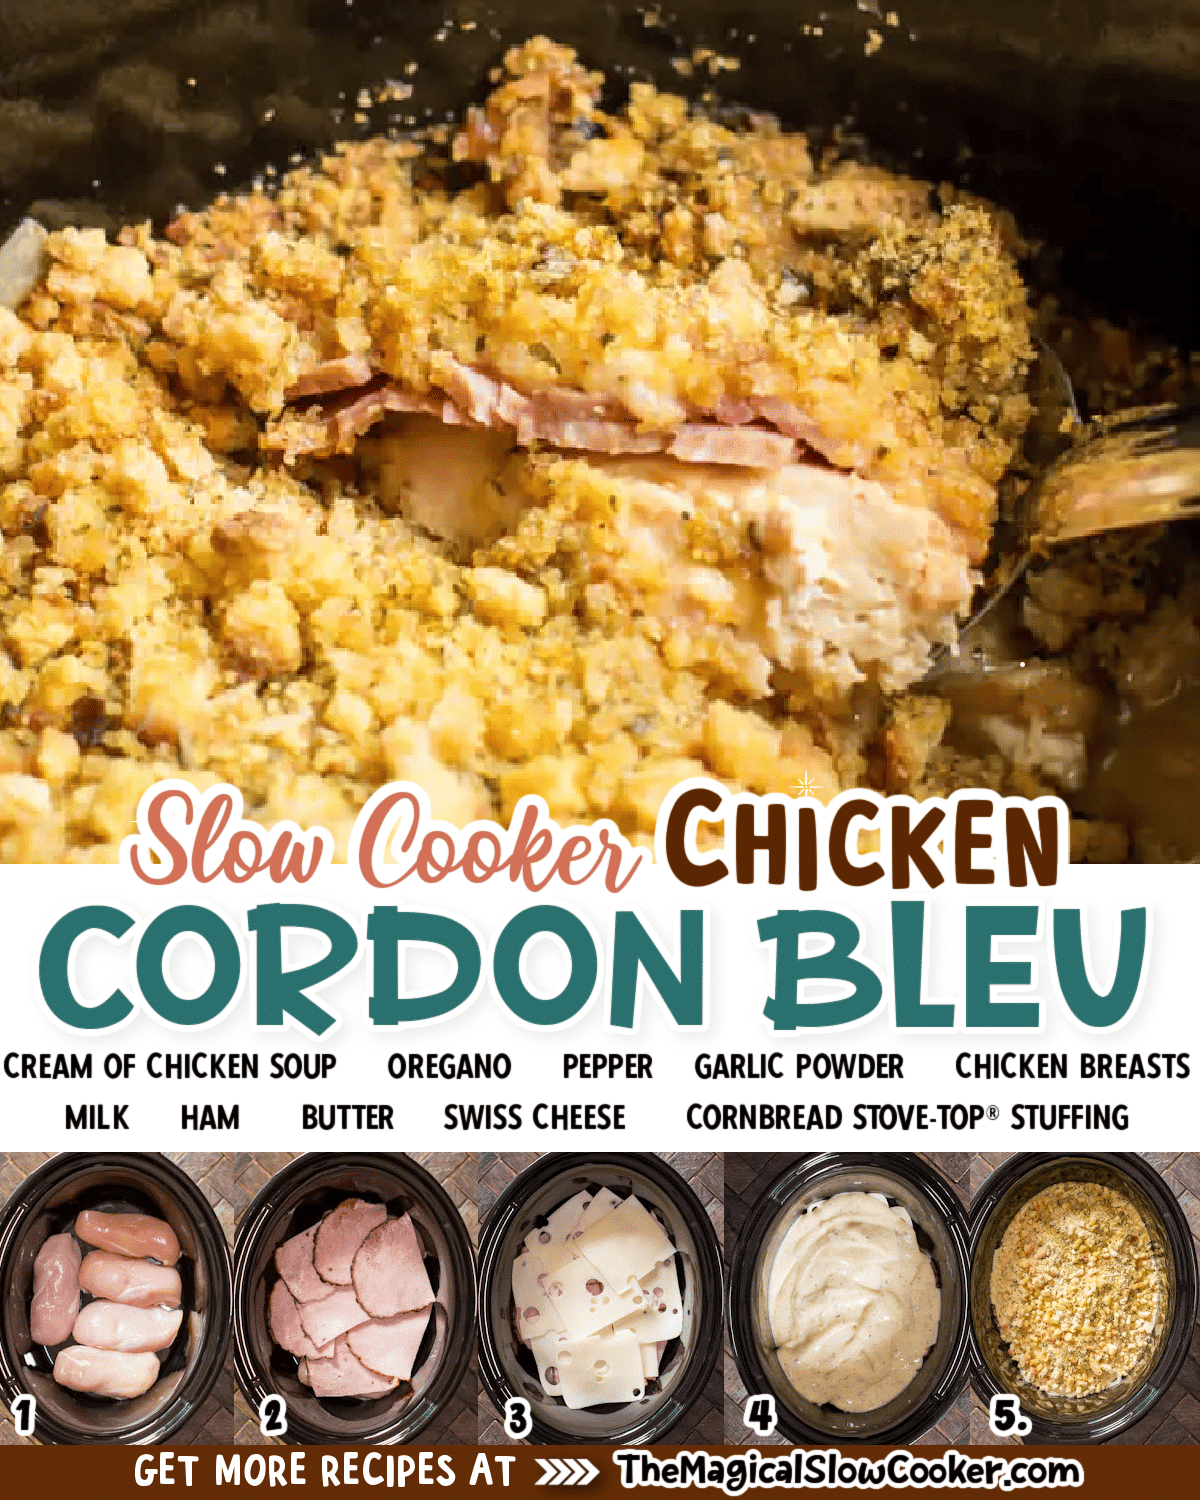 Collage of chicken cordon bleu images with text of what ingredients are.